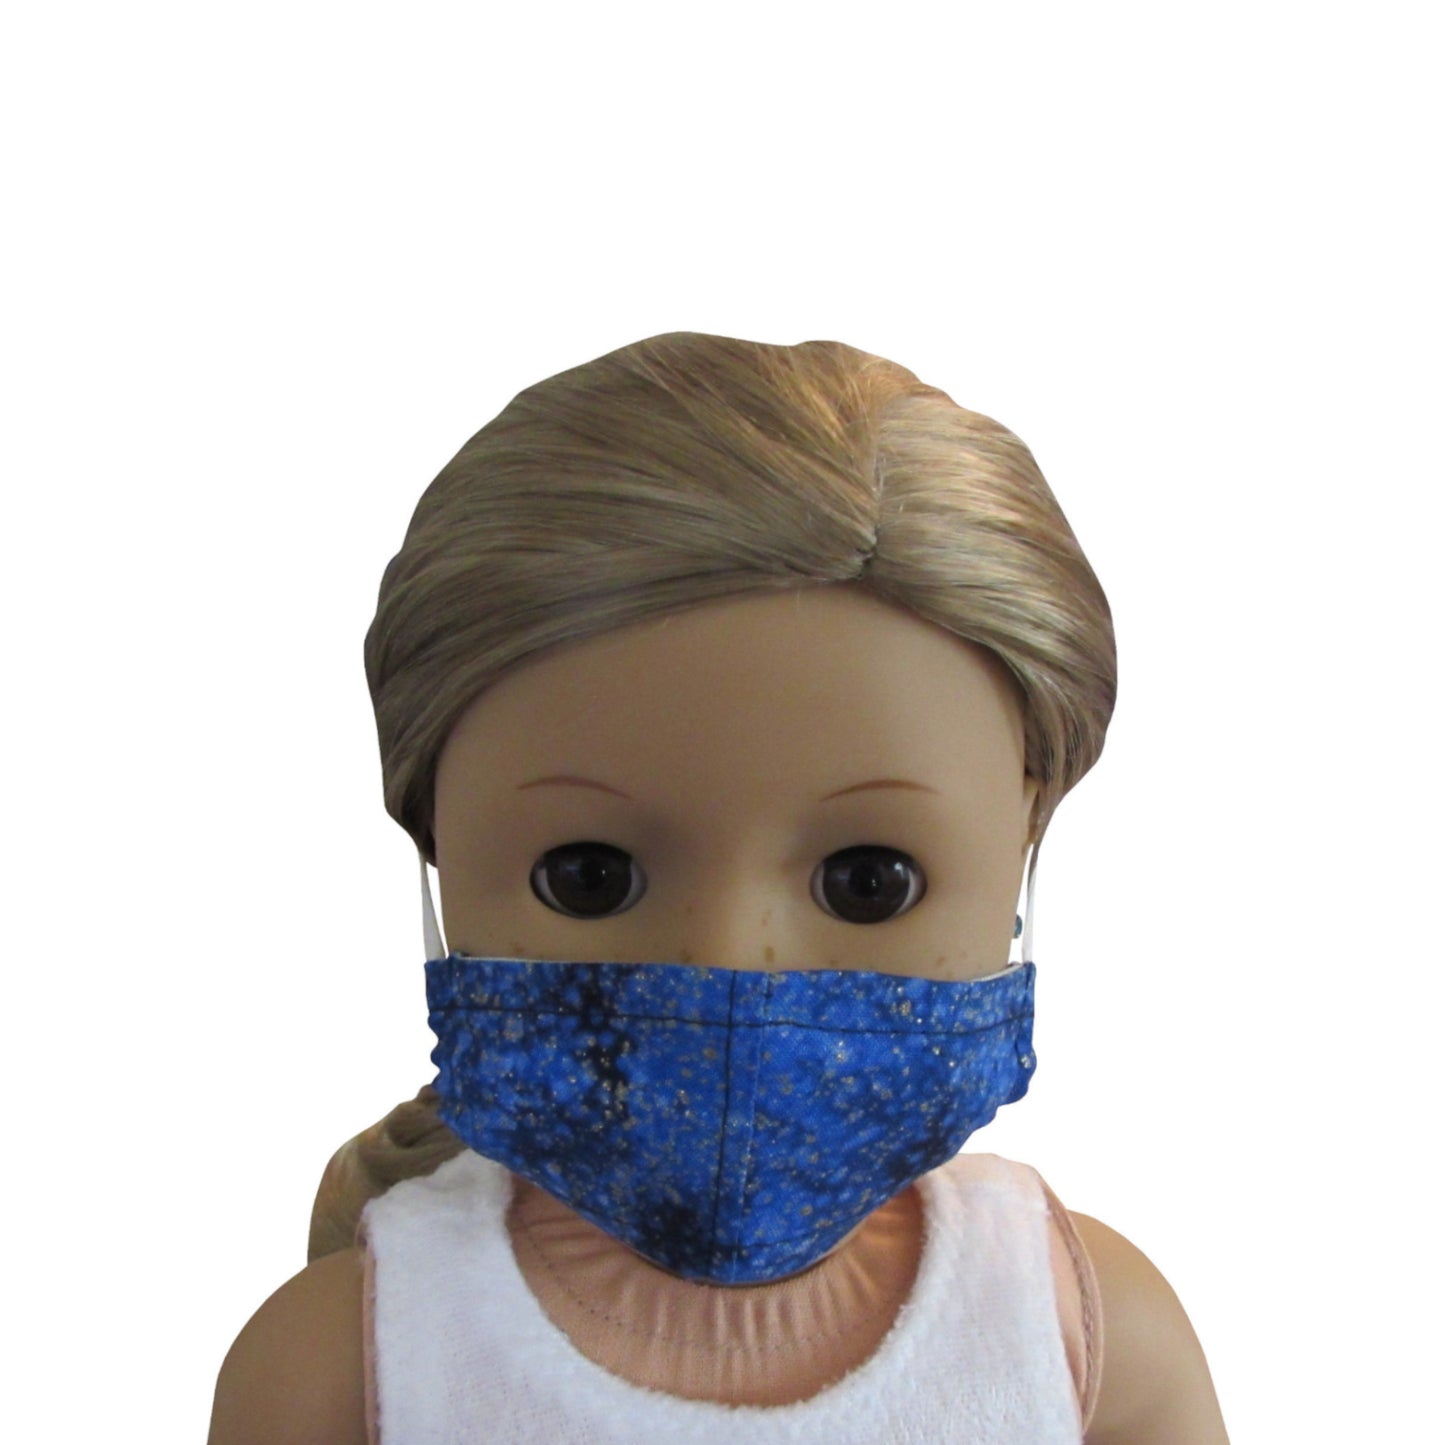 Metallic Blue Print Doll Face Mask for 18-inch dolls with American Girl Doll Front